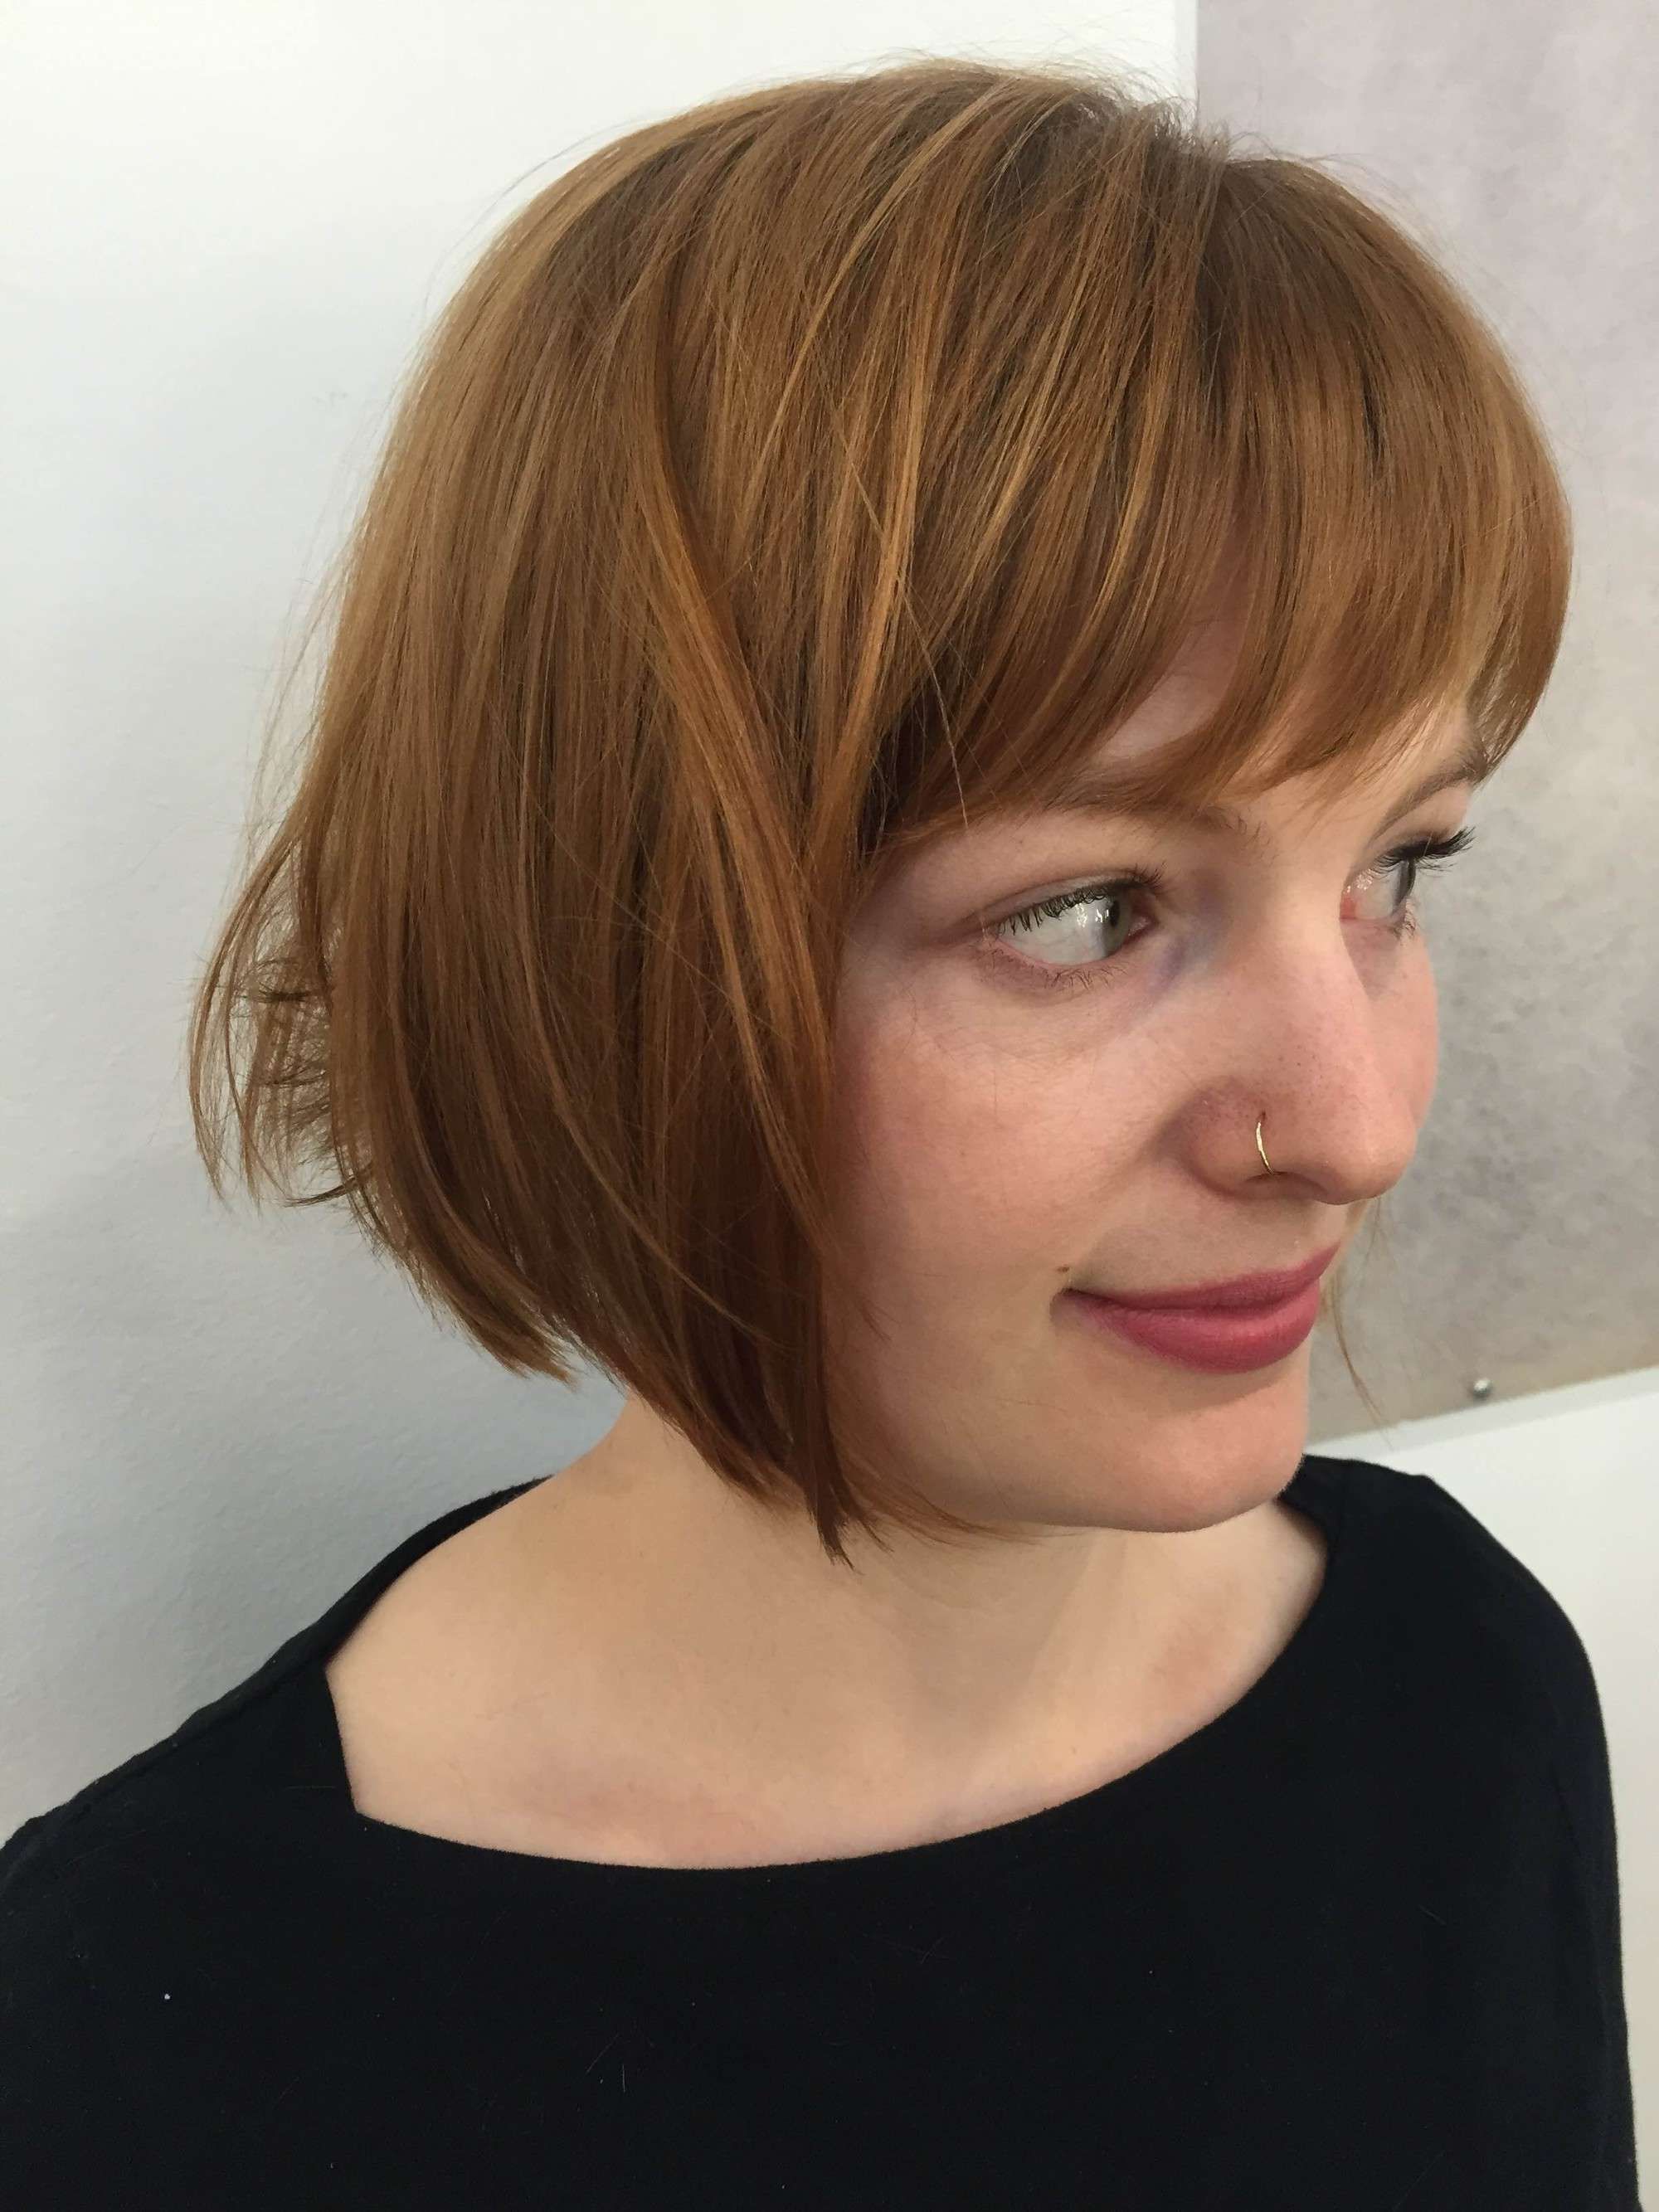 4 Things To Know About Cutting Your Red Hair Short Throughout Red Hair Short Haircuts (View 25 of 25)